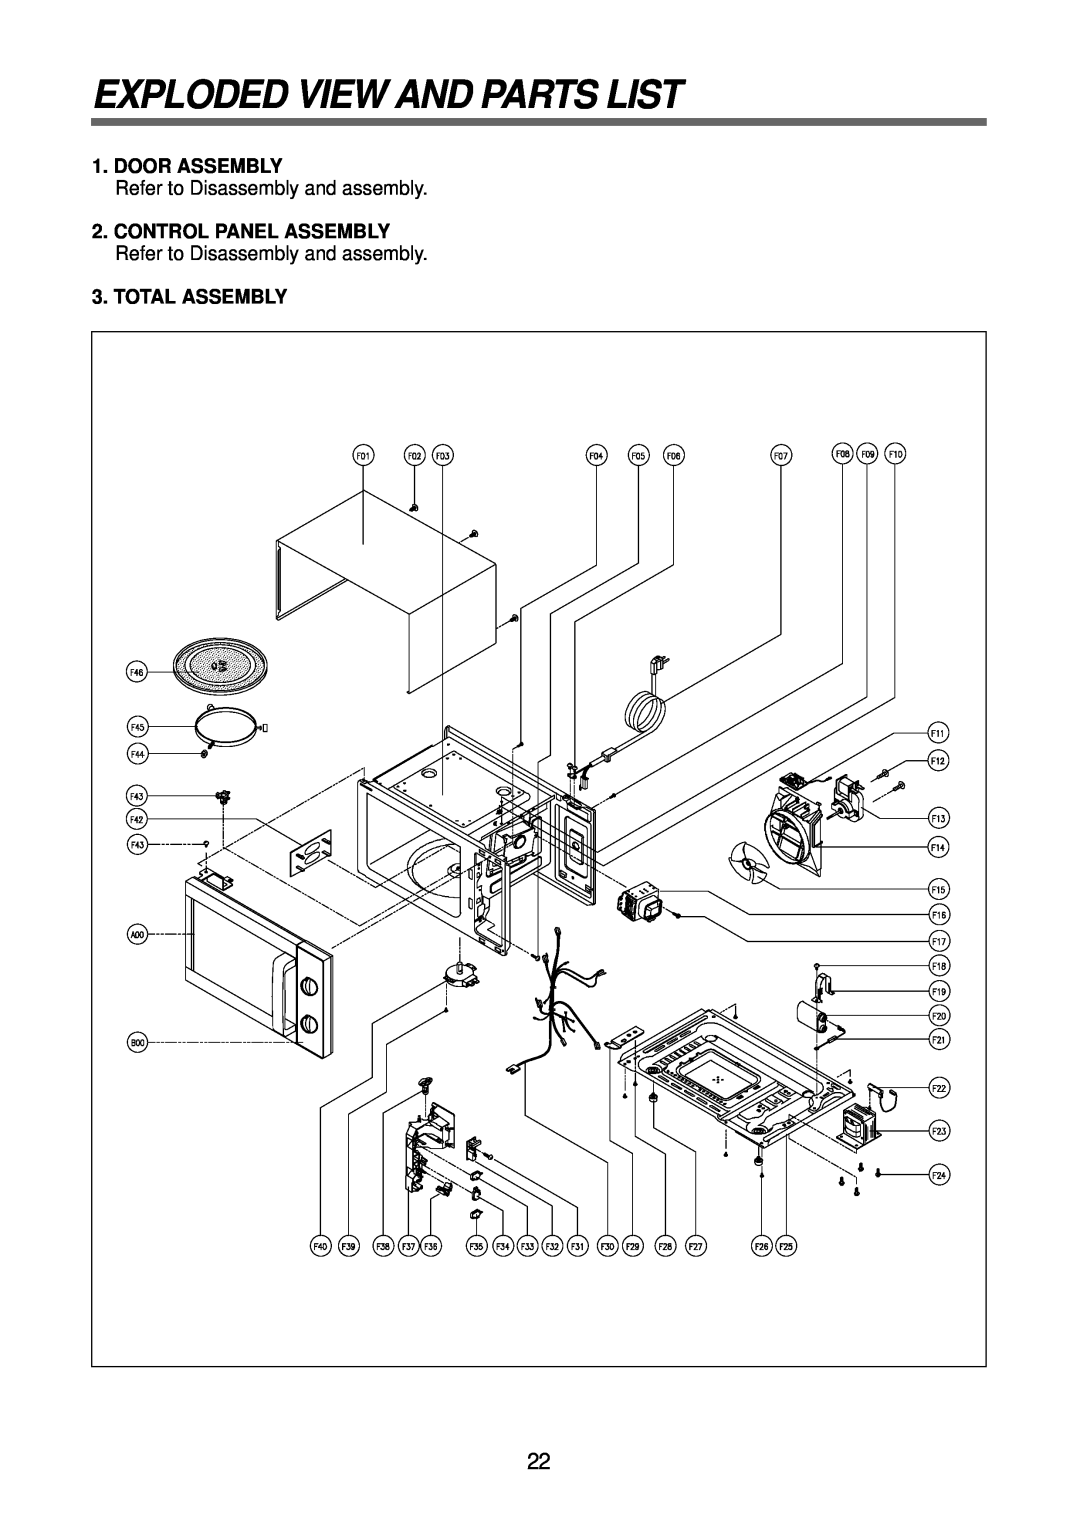 Daewoo KOR-6N575S Exploded View And Parts List, Door Assembly, Refer to Disassembly and assembly, Total Assembly 